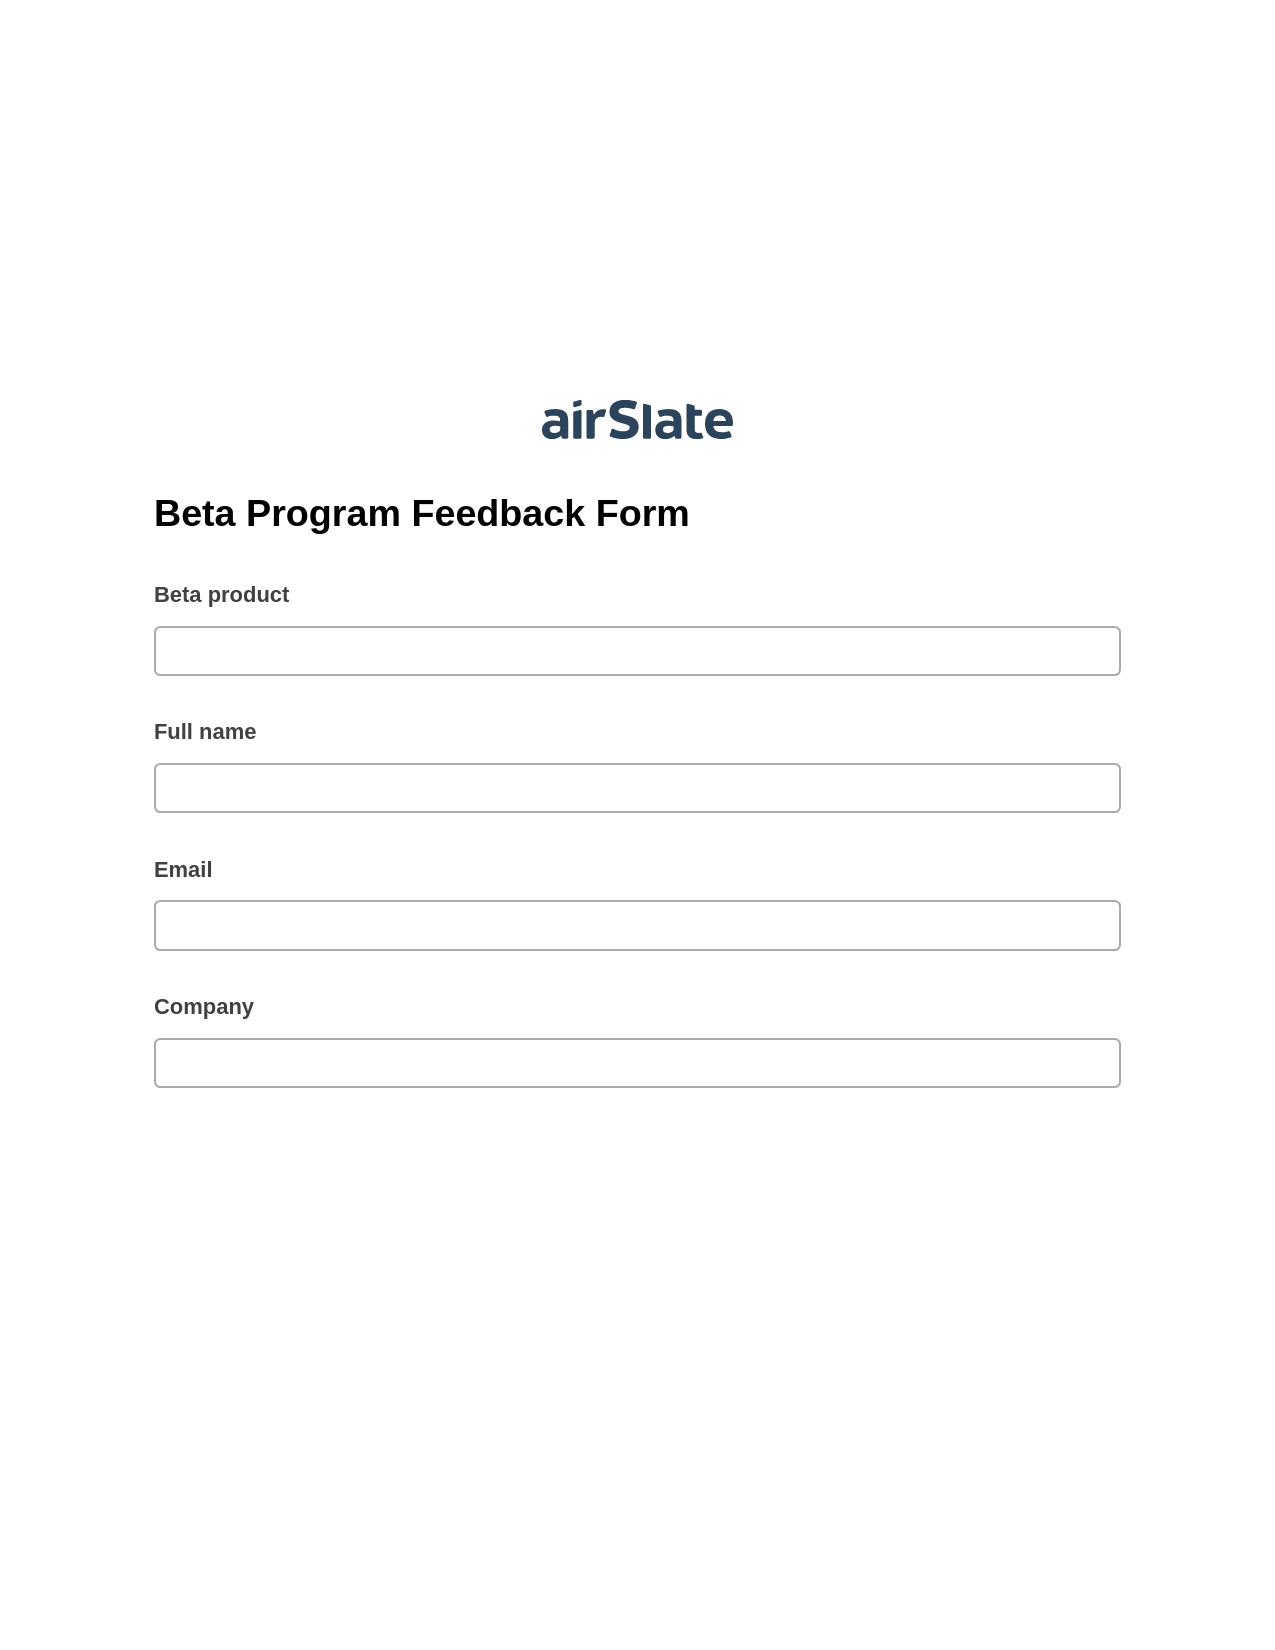 Beta Program Feedback Form Pre-fill Dropdown from Airtable, Remove Slate Bot, Post-finish Document Bot